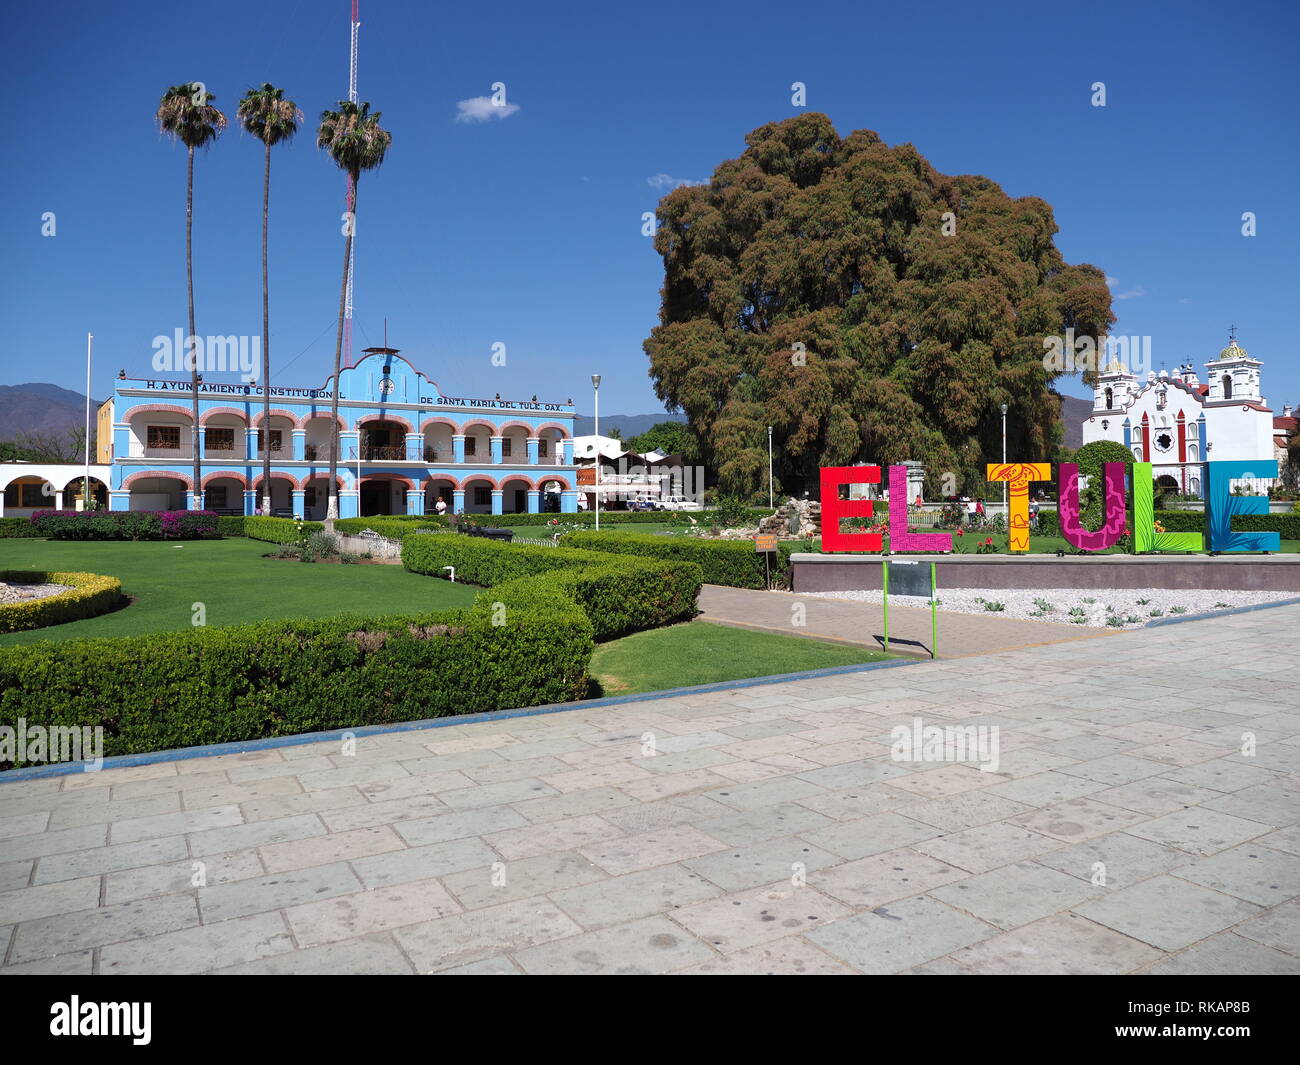 Scenic main square in front of town hall and cypress tree with stoutest trunk in Santa Maria del Tule city in Mexico Stock Photo